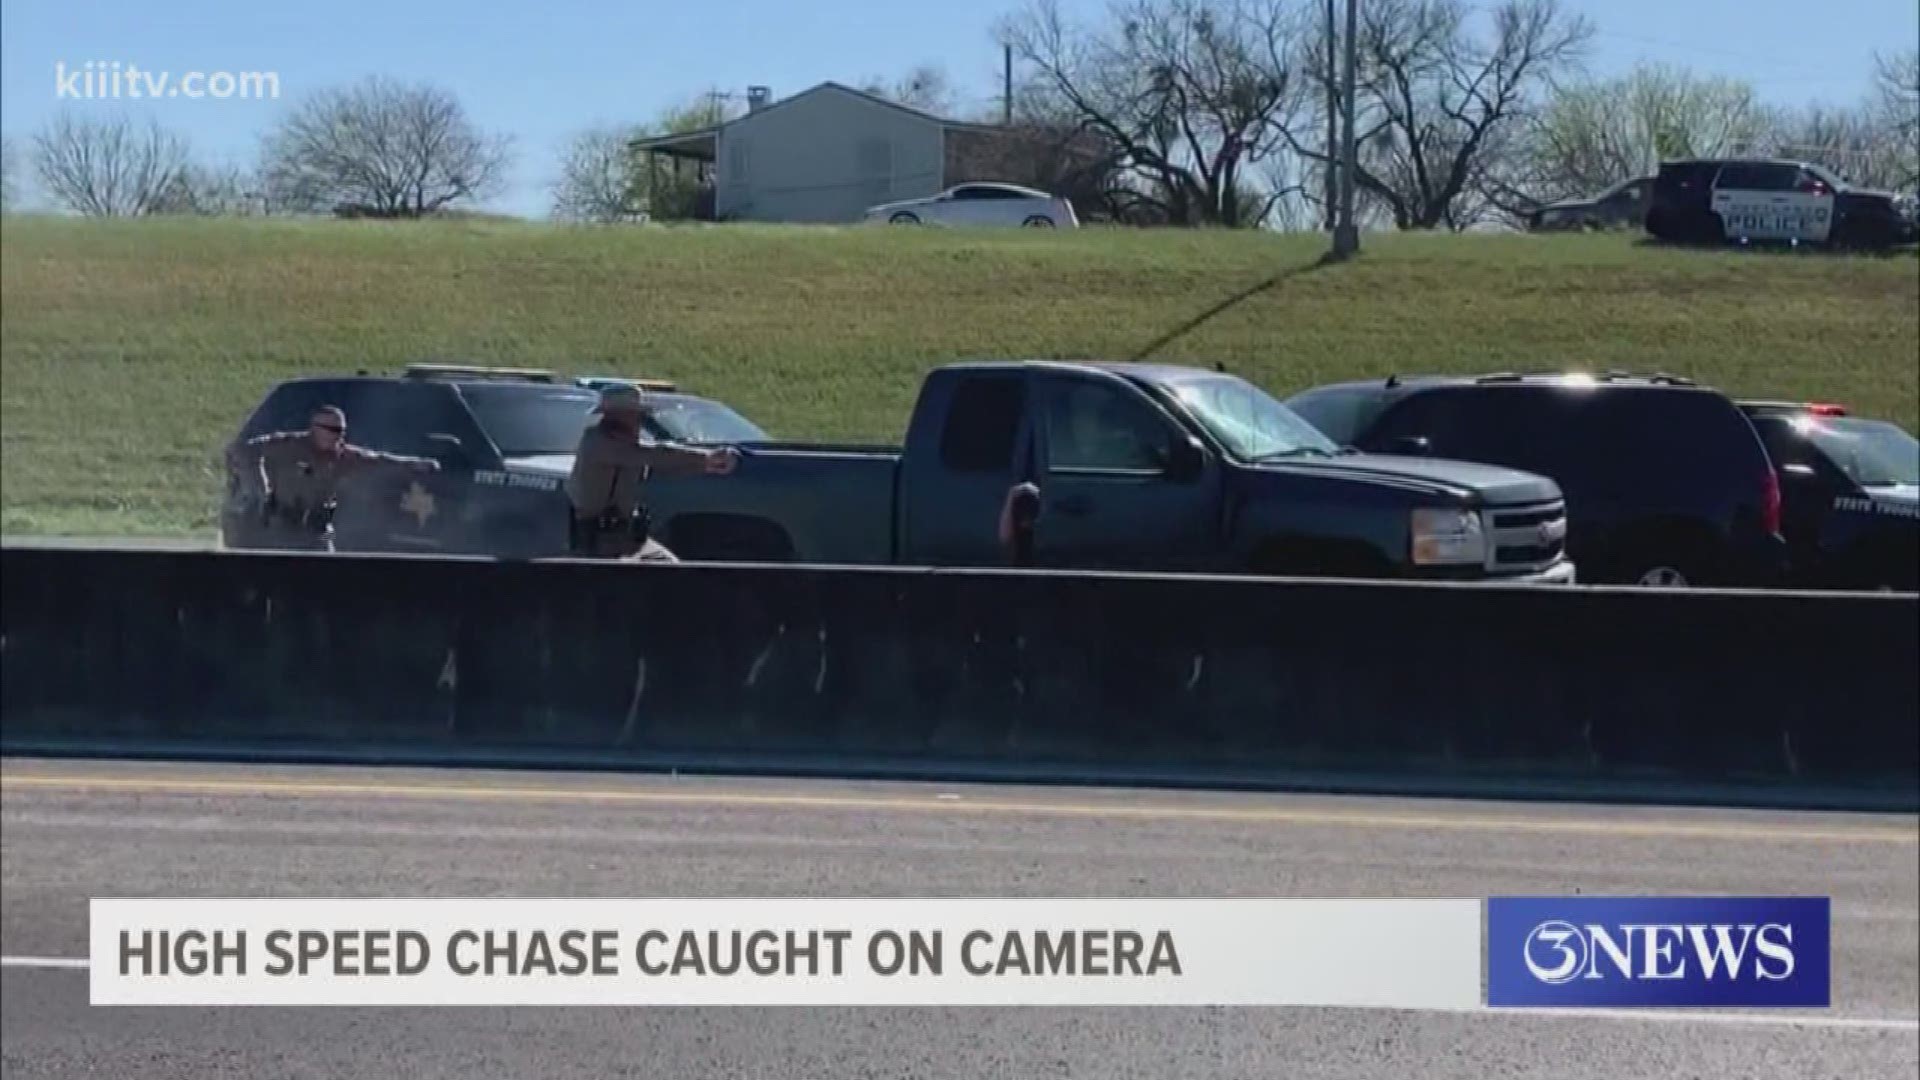 A wanted man is now in custody after leading law officers on a wild high speed chase this afternoon.